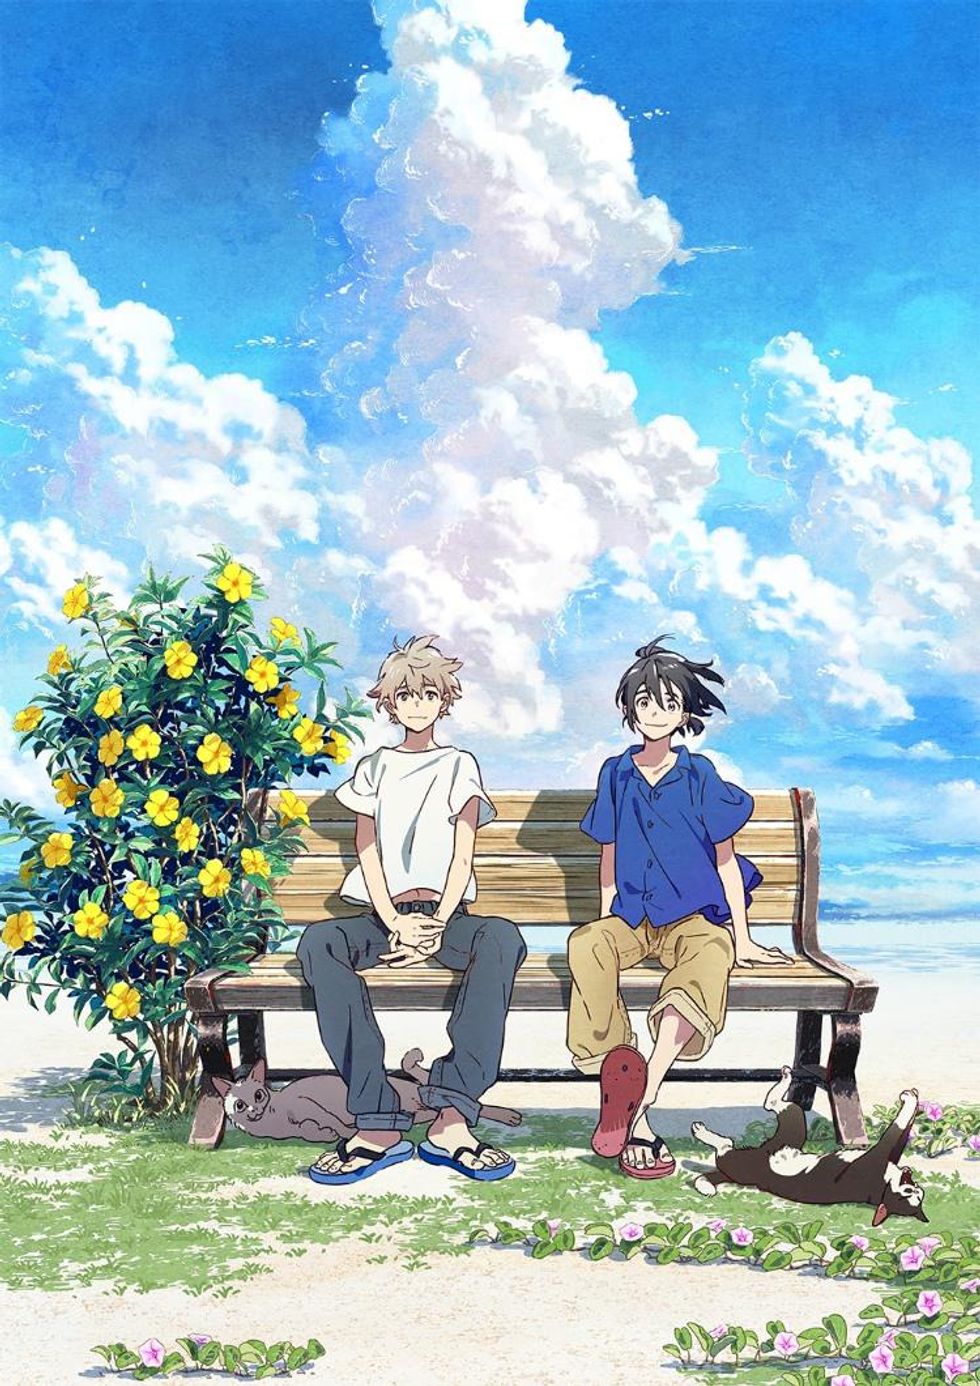 This Gay Romance Anime Is Coming to the U.S. & We're Already Emotional